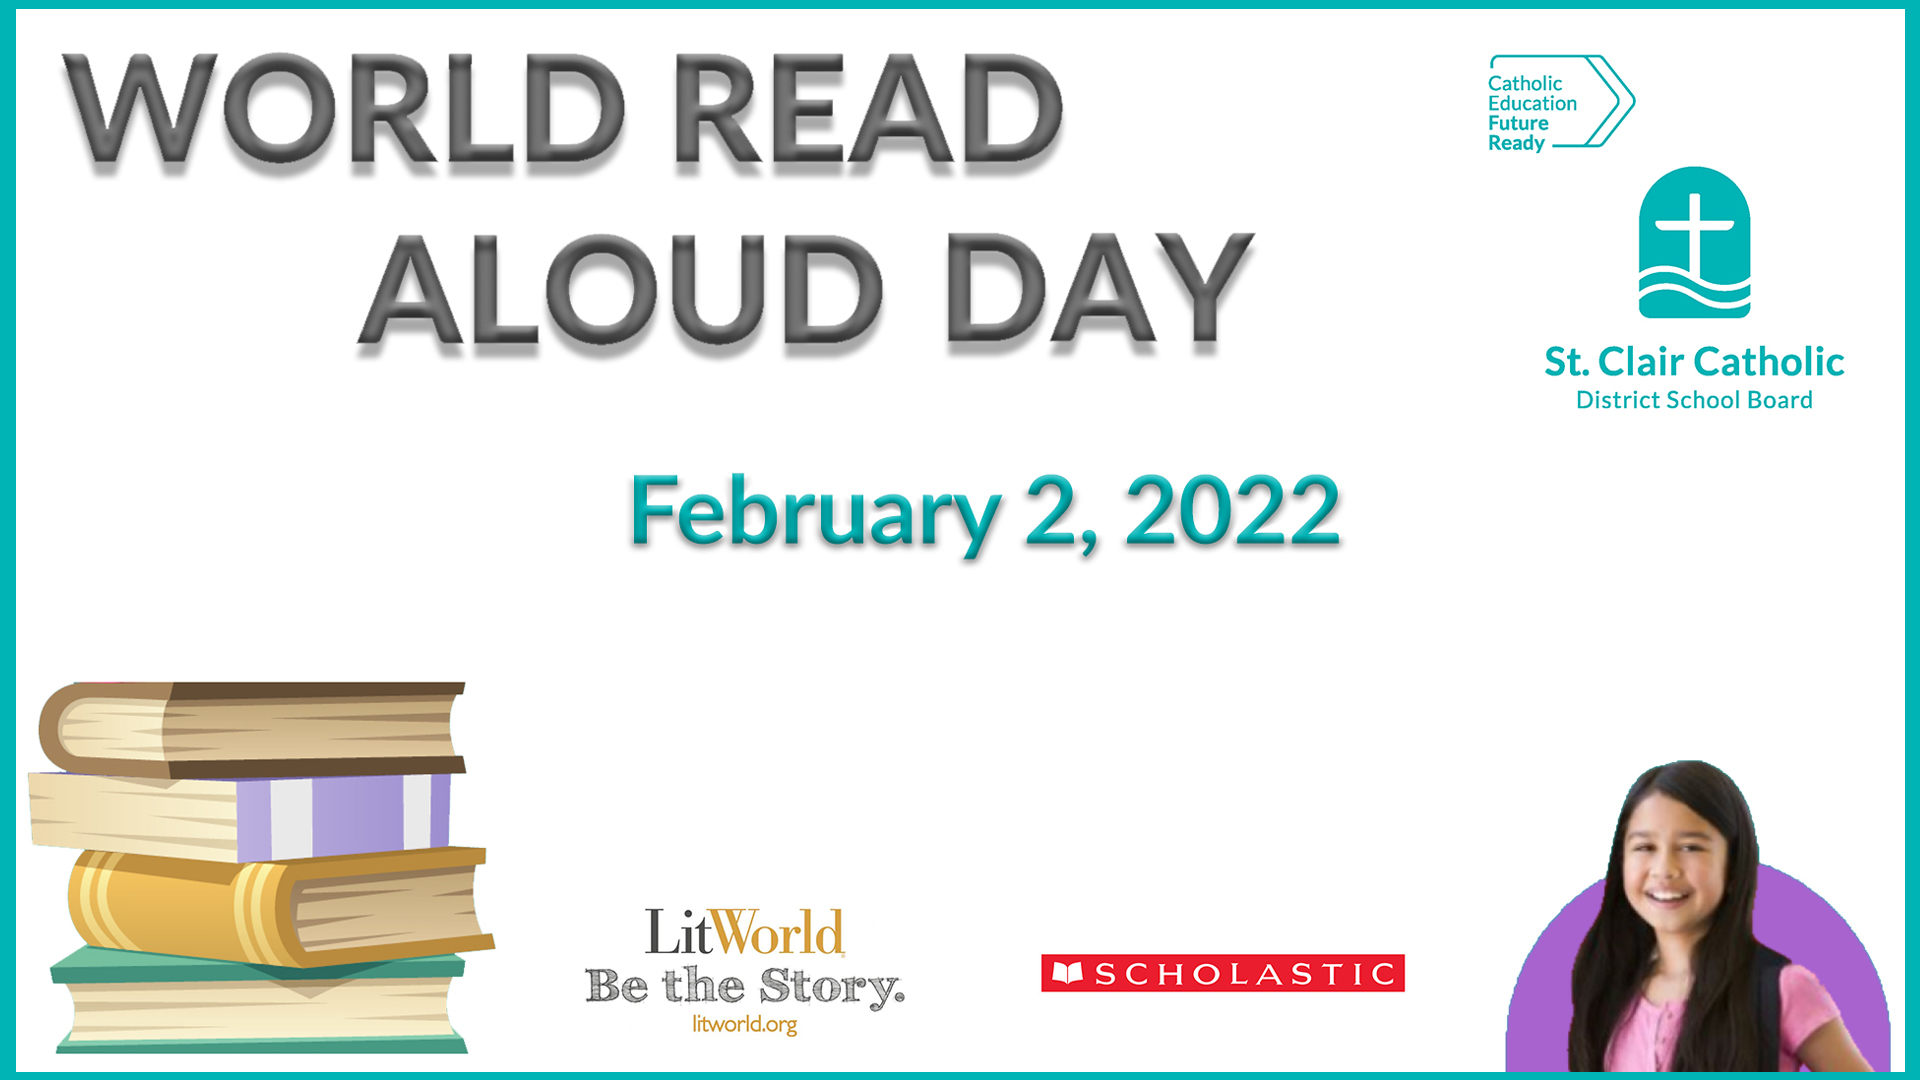 St. Clair Catholic Celebrates ‘World Read Aloud Day’ with Virtual Guest Readers Across the District